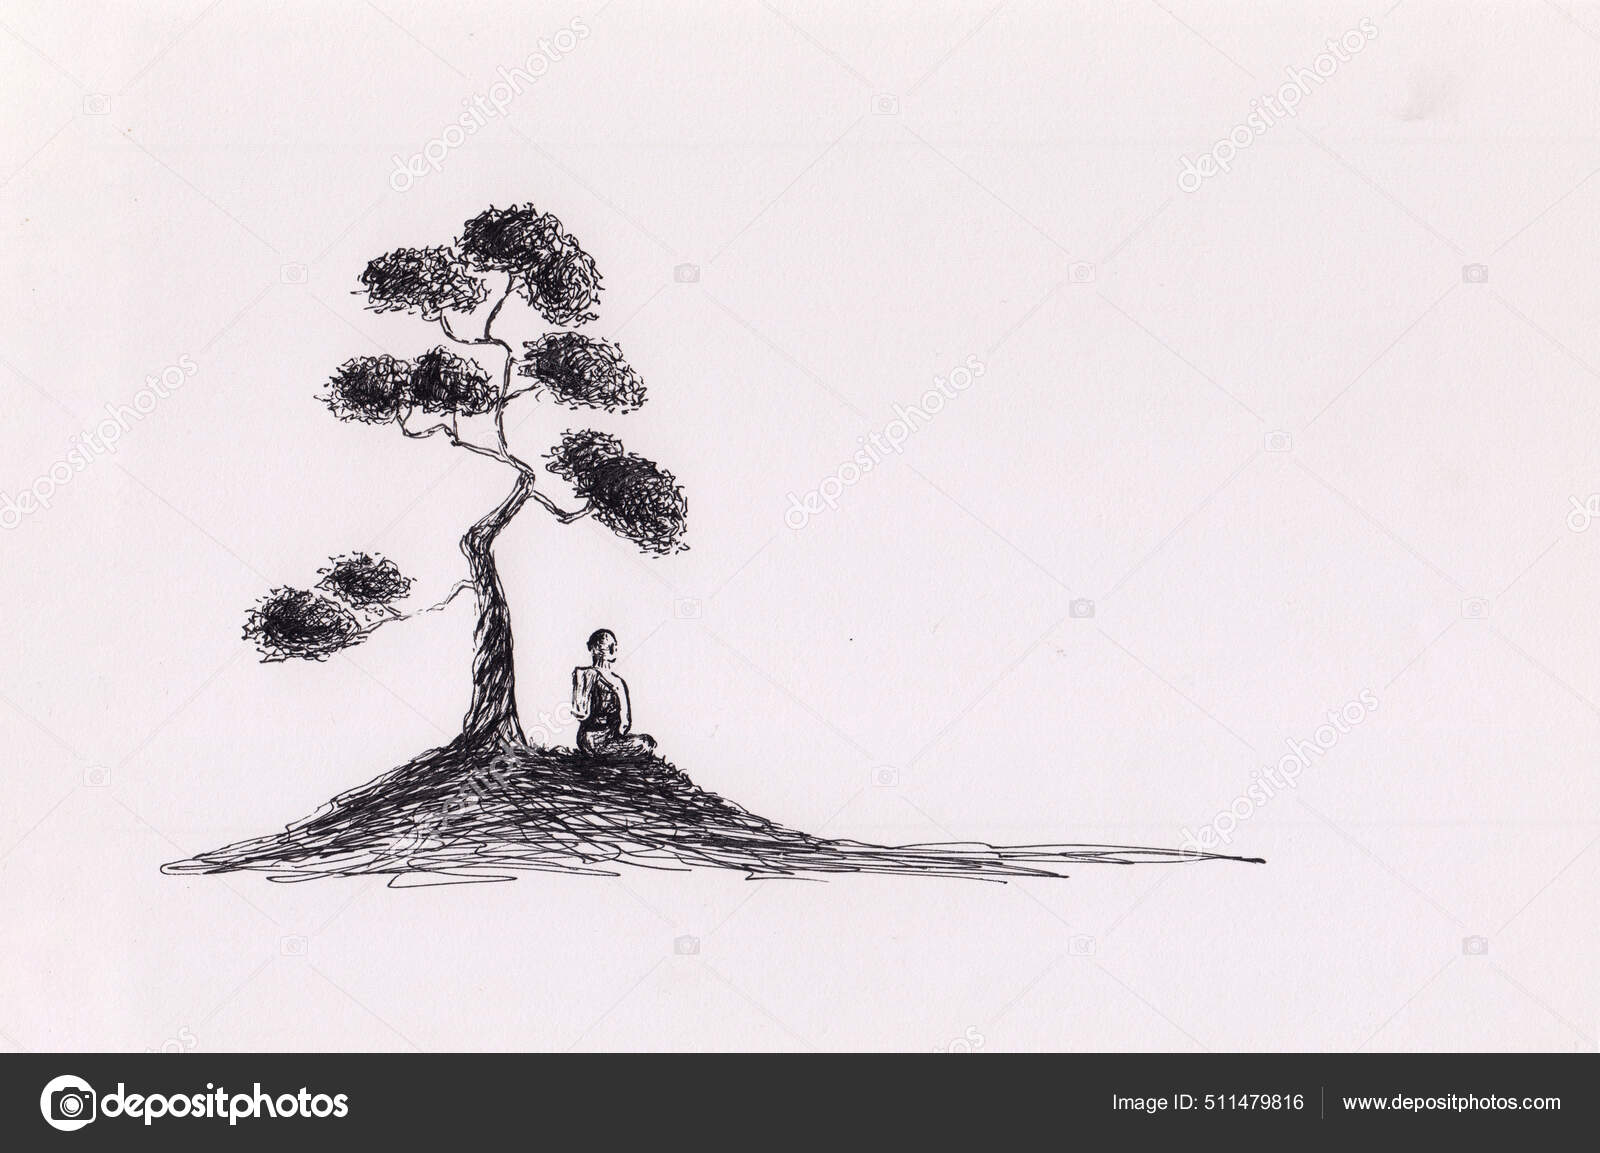 How to Draw Easy Pencil Scenery sketch Stepbystep  creative Pencil  Sketch Scenery easy way   Nature art drawings Art drawings simple Nature  sketches pencil